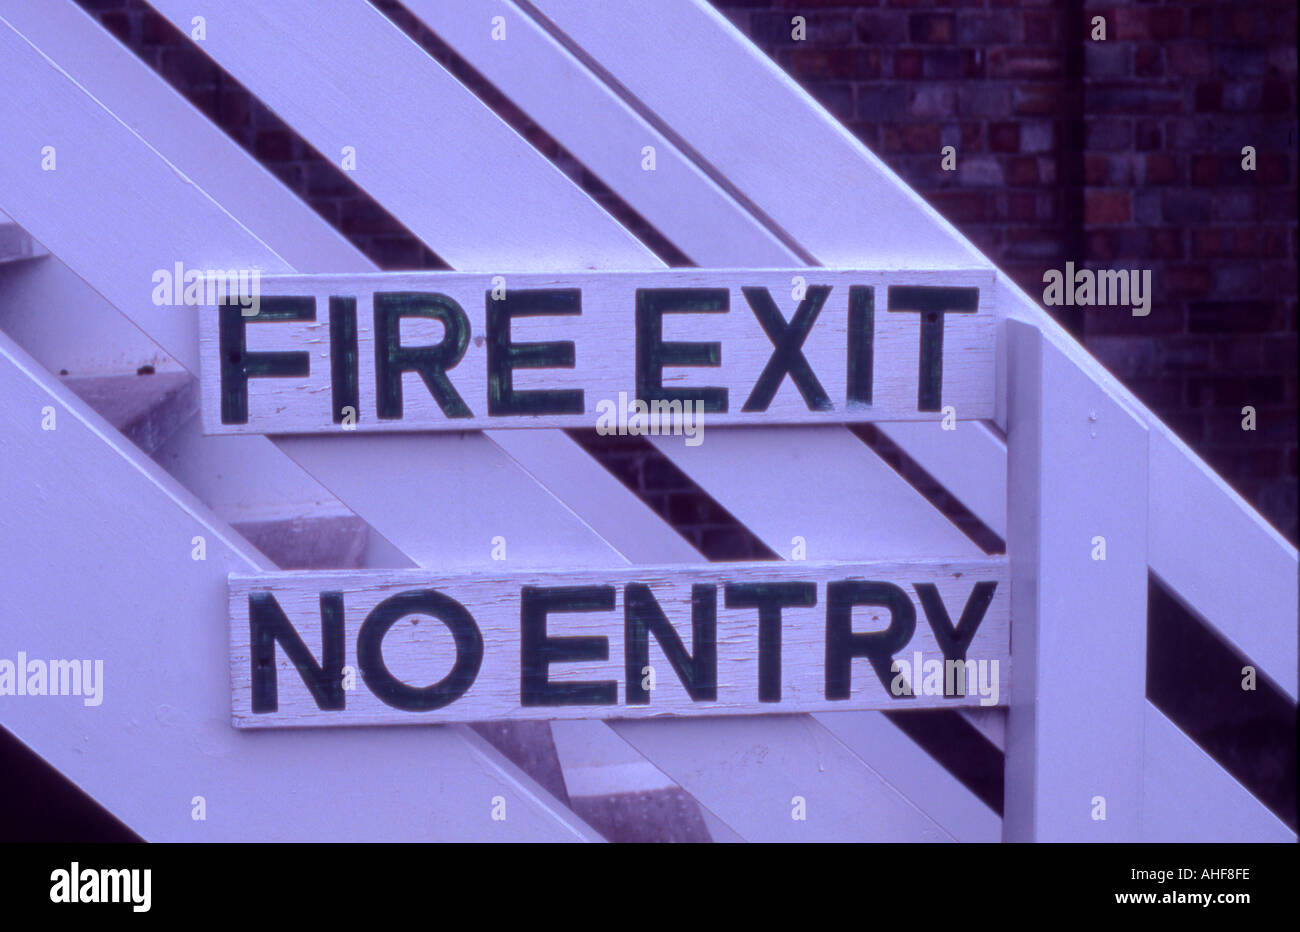 Fire Exit Snape Malting Suffolk Stock Photo